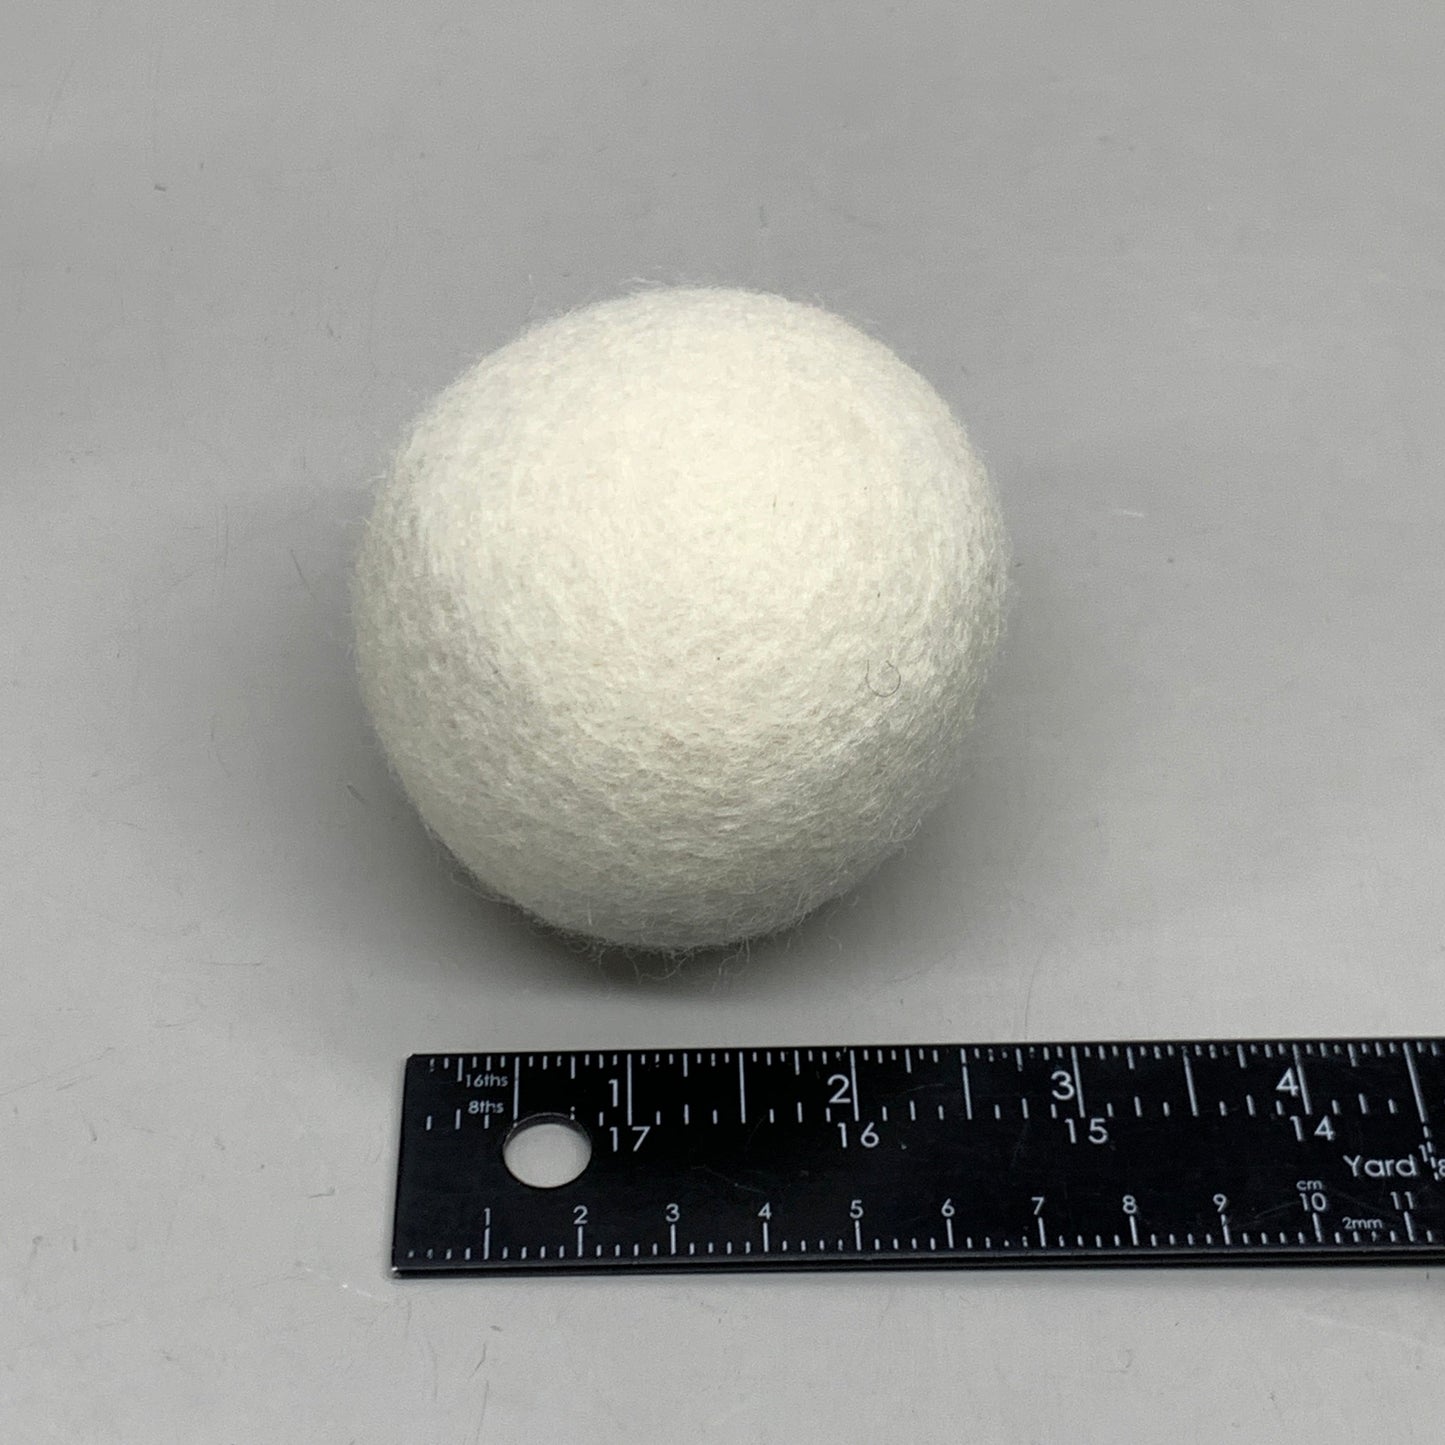 ZA@ MOLLY'S SUDS (2 PACK) Natural Wool Dryer Balls Natural Fabric Softener 6 Balls Total E